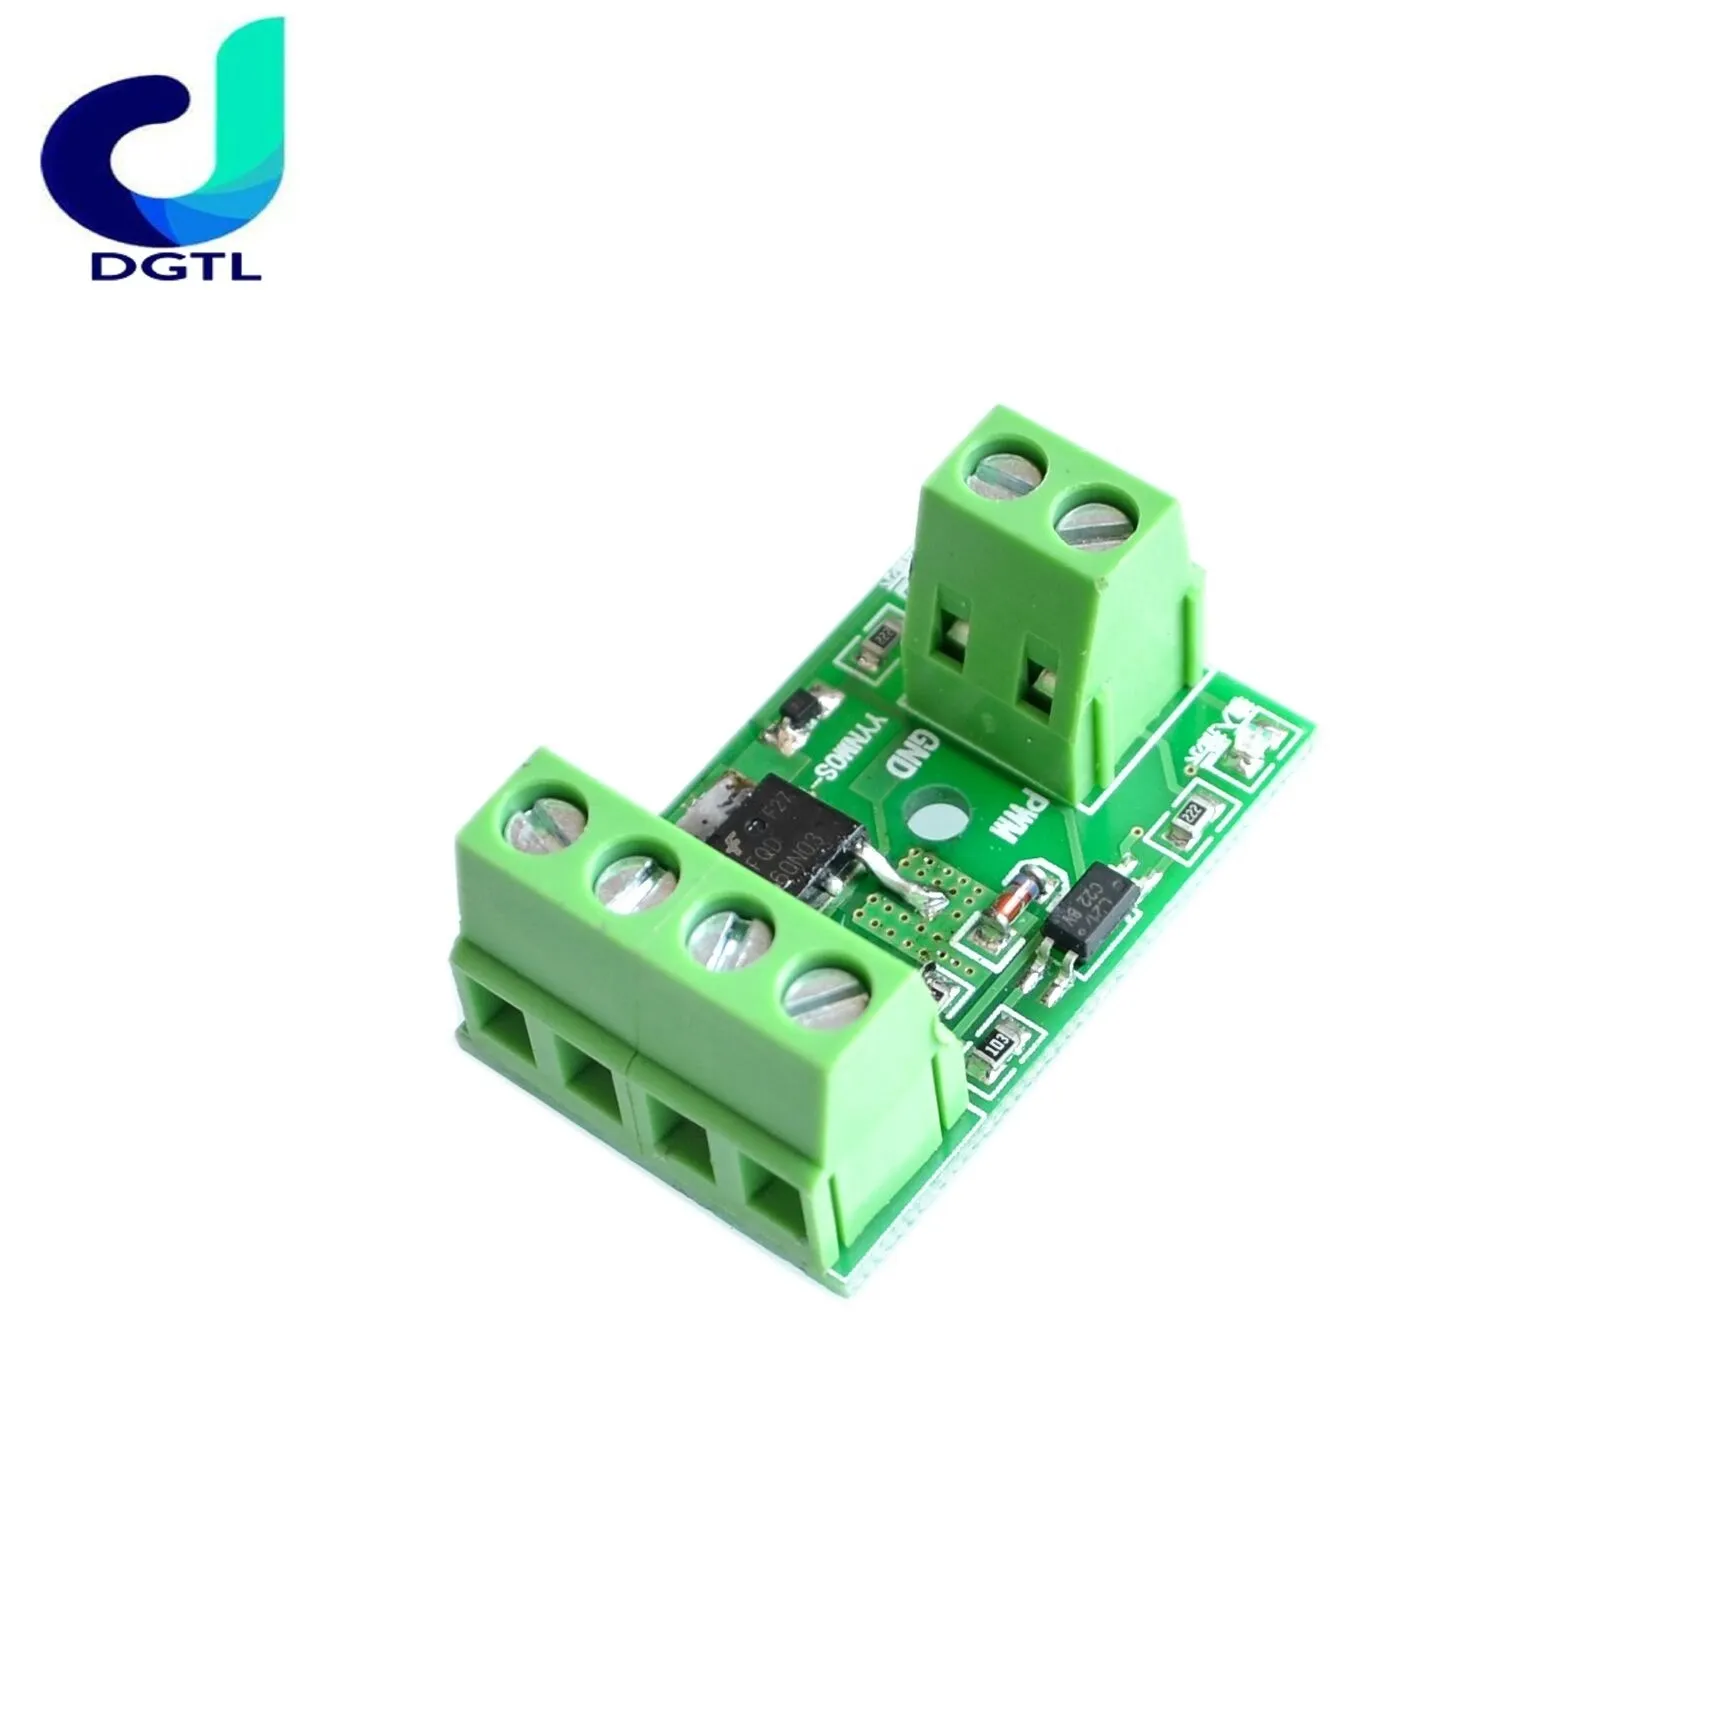 

Mosfet MOS Optocoupler Isolation Driver Module Field Effect Transistor Trigger Switch PWM Control Board 3-20V